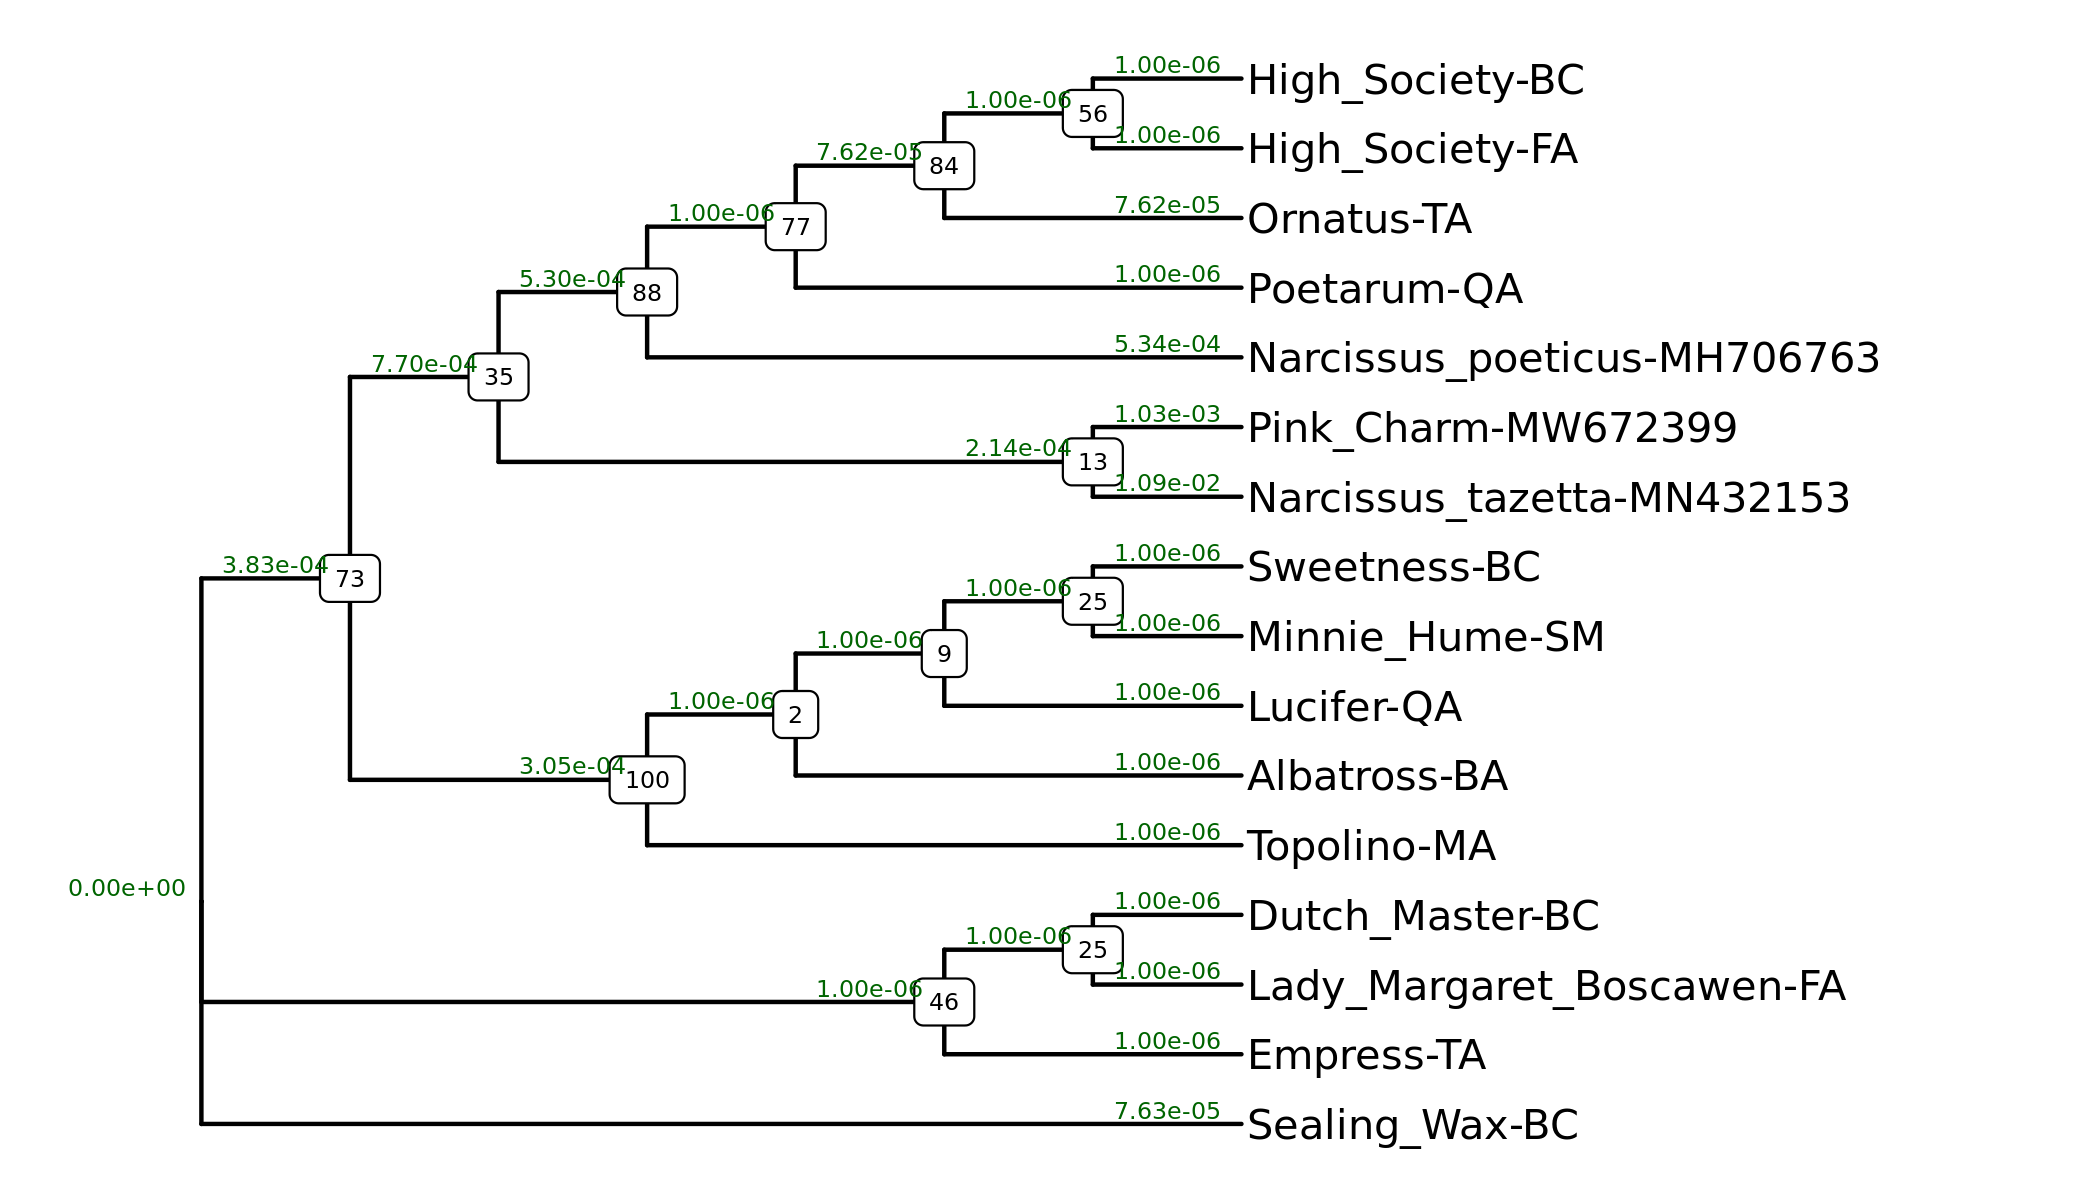 Phylogenetic tree of daffodil sequences